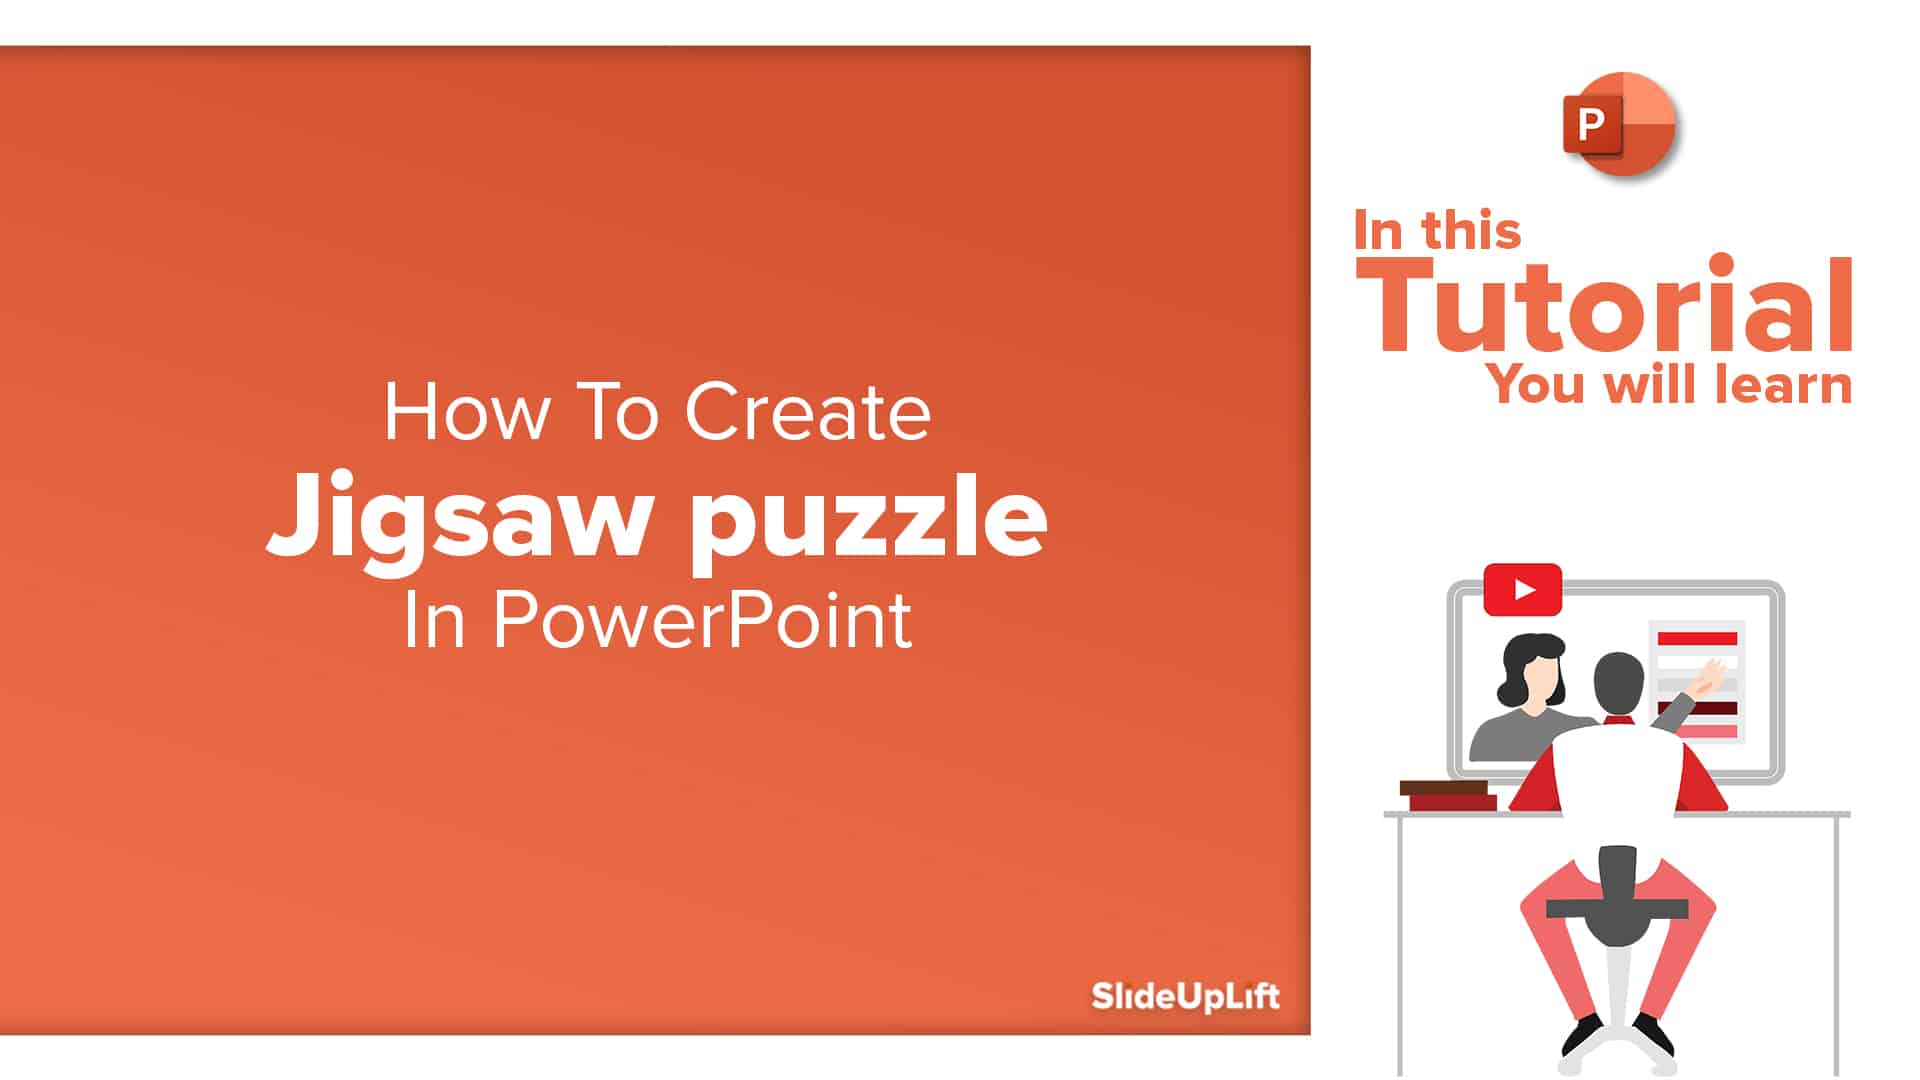 How To Make Jigsaw Puzzle In PowerPoint – PowerPoint Tutorial